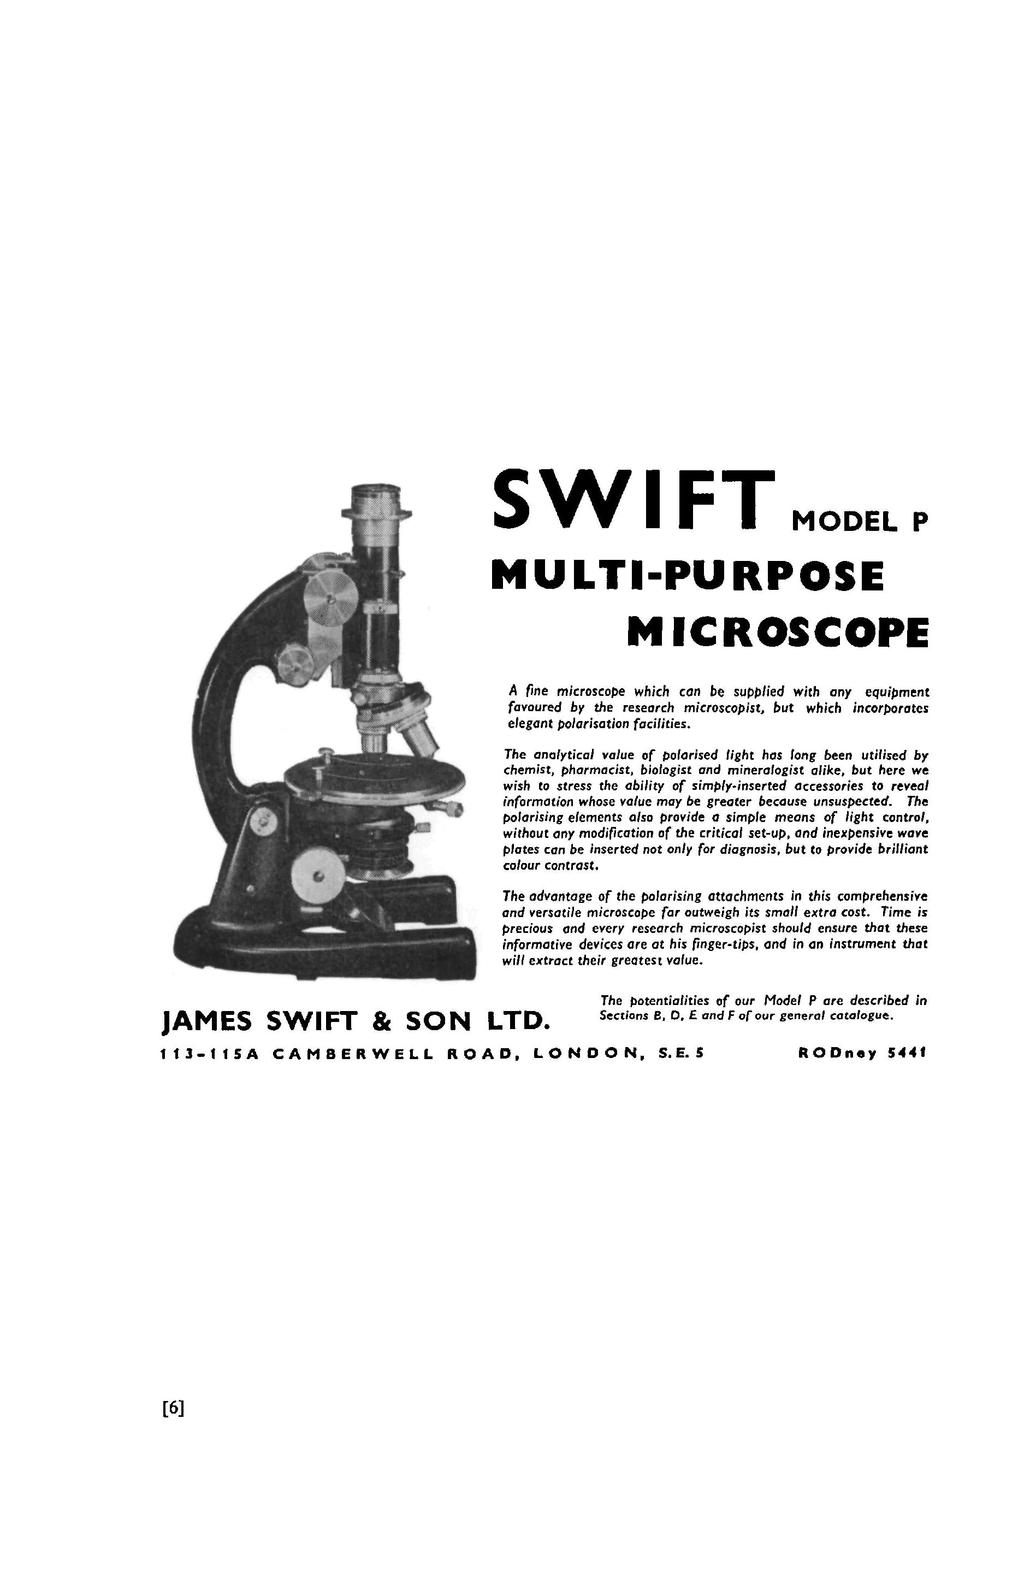 3 W I f I MODEL P MULTI-PURPOSE MICROSCOPE A fine microscope which can be supplied with any equipment favoured by the research microscopist, but which incorporates elegant polarisation facilities.